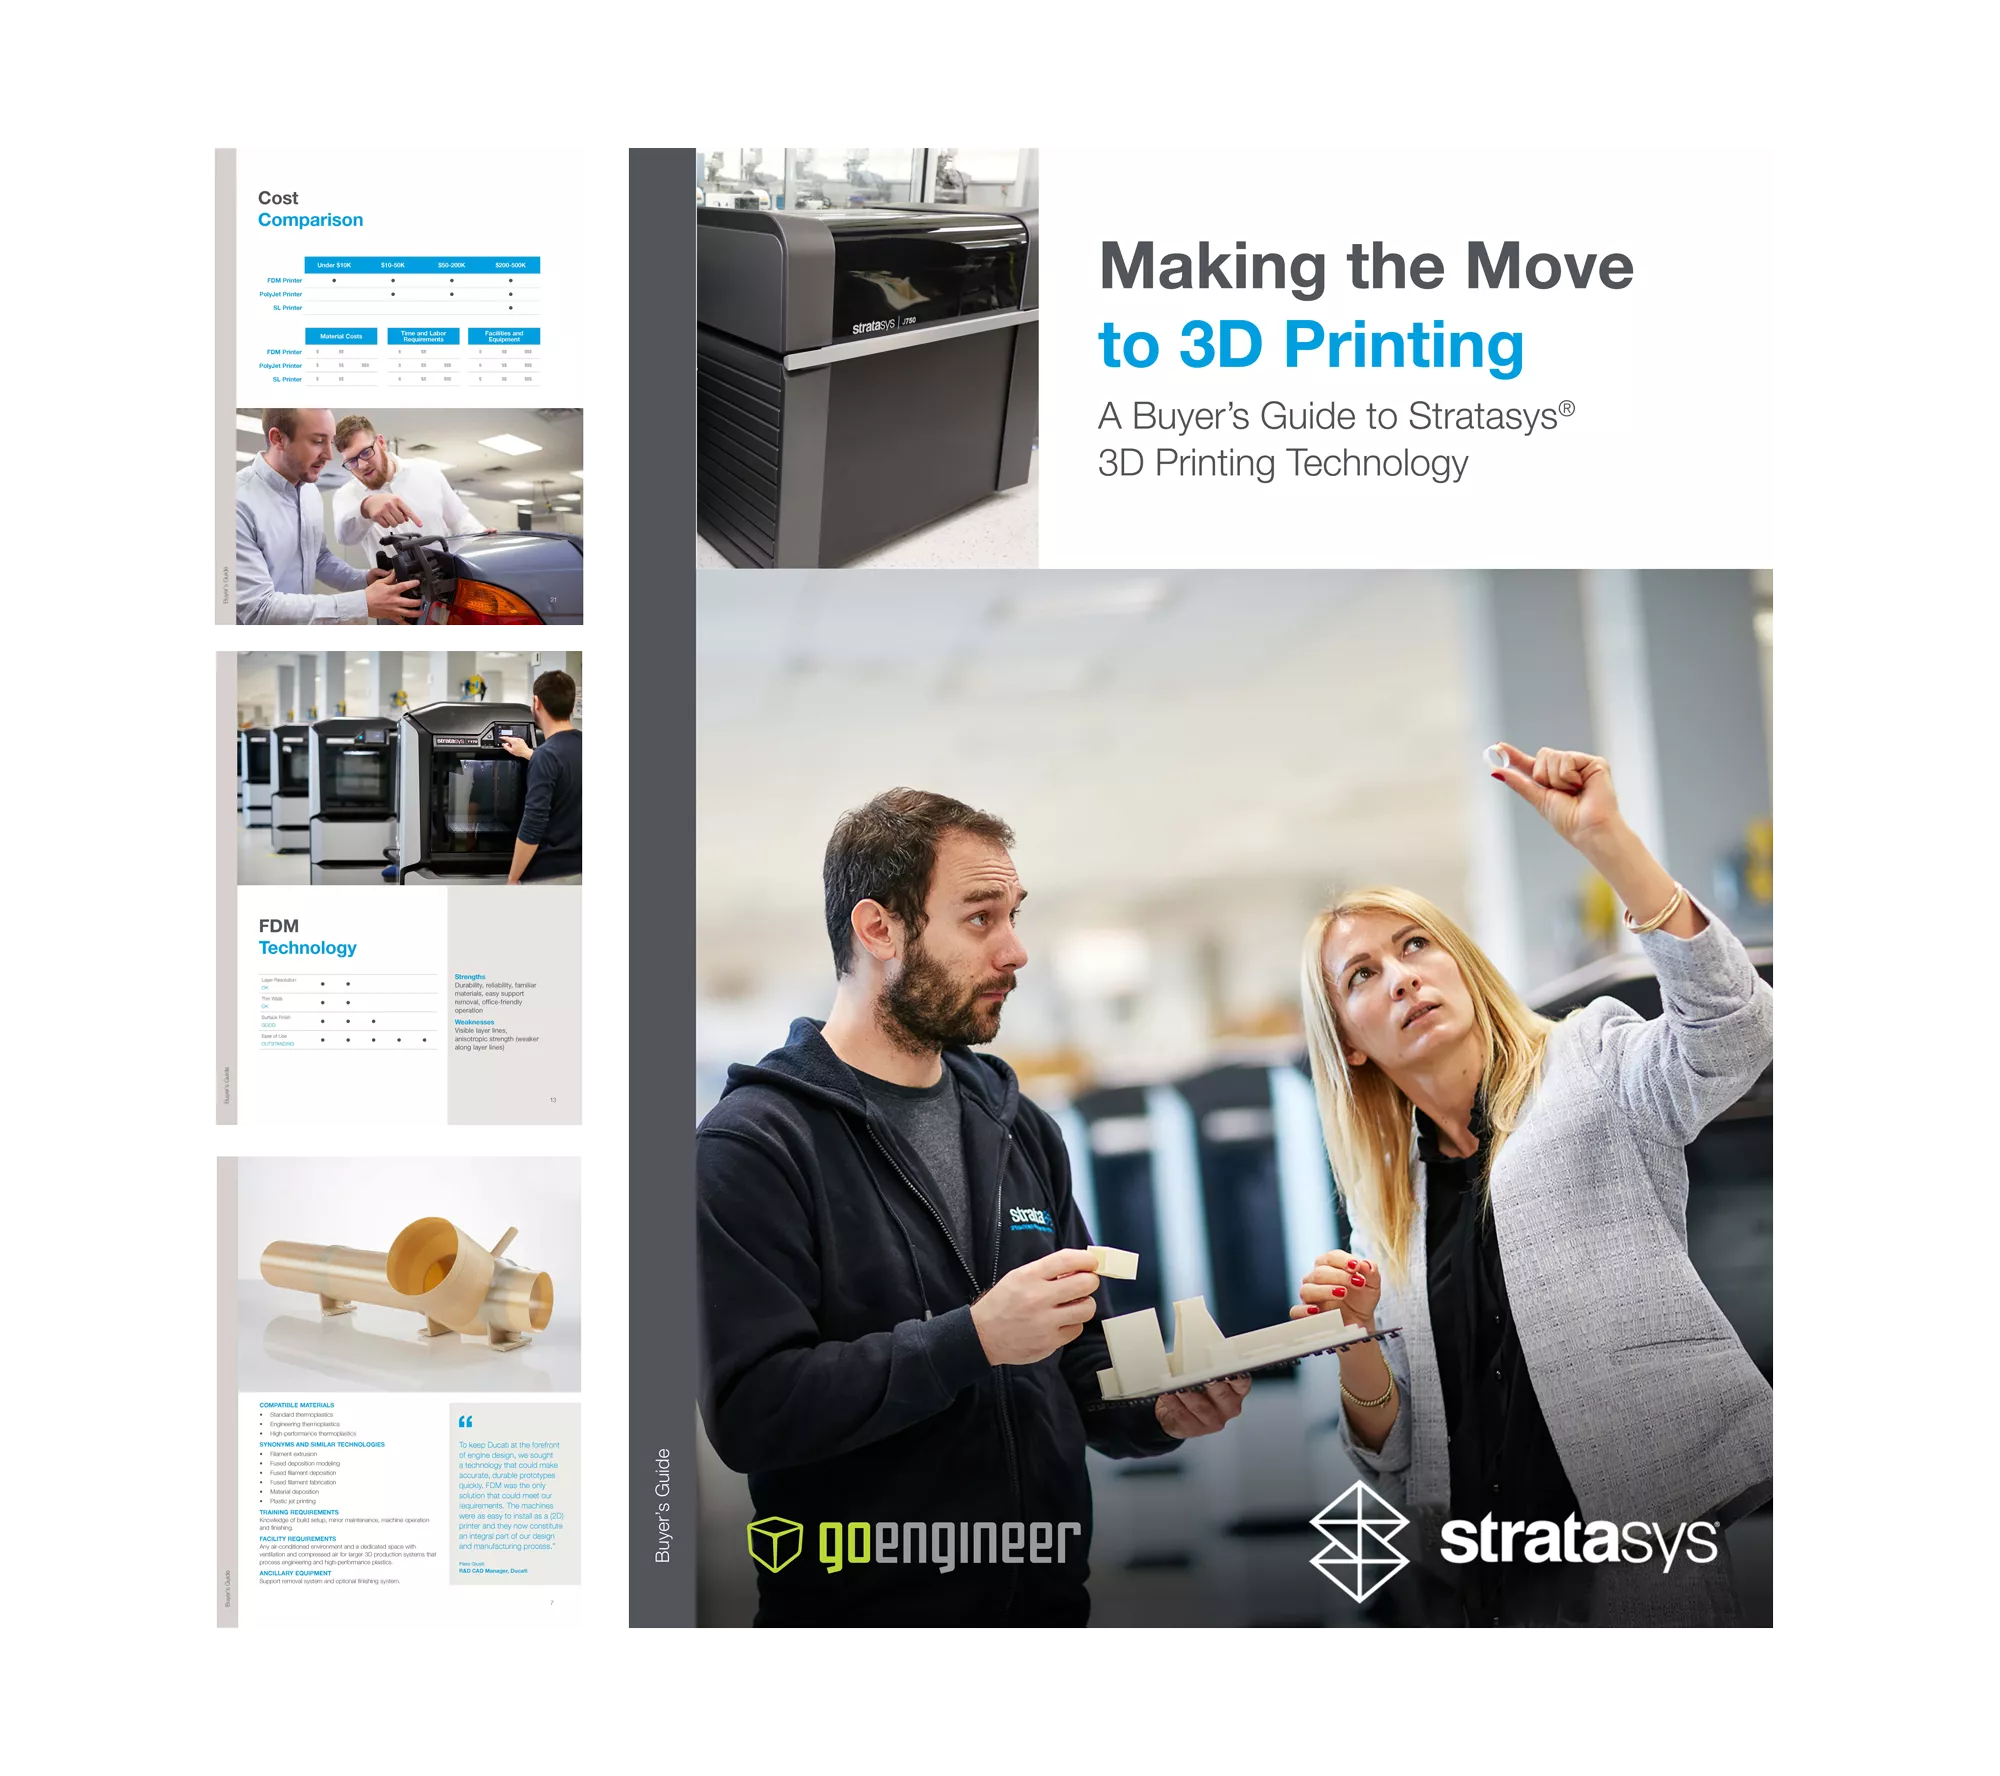 Making the Move to 3D Printing: A Buyer's Guide to 3D Printing Technology